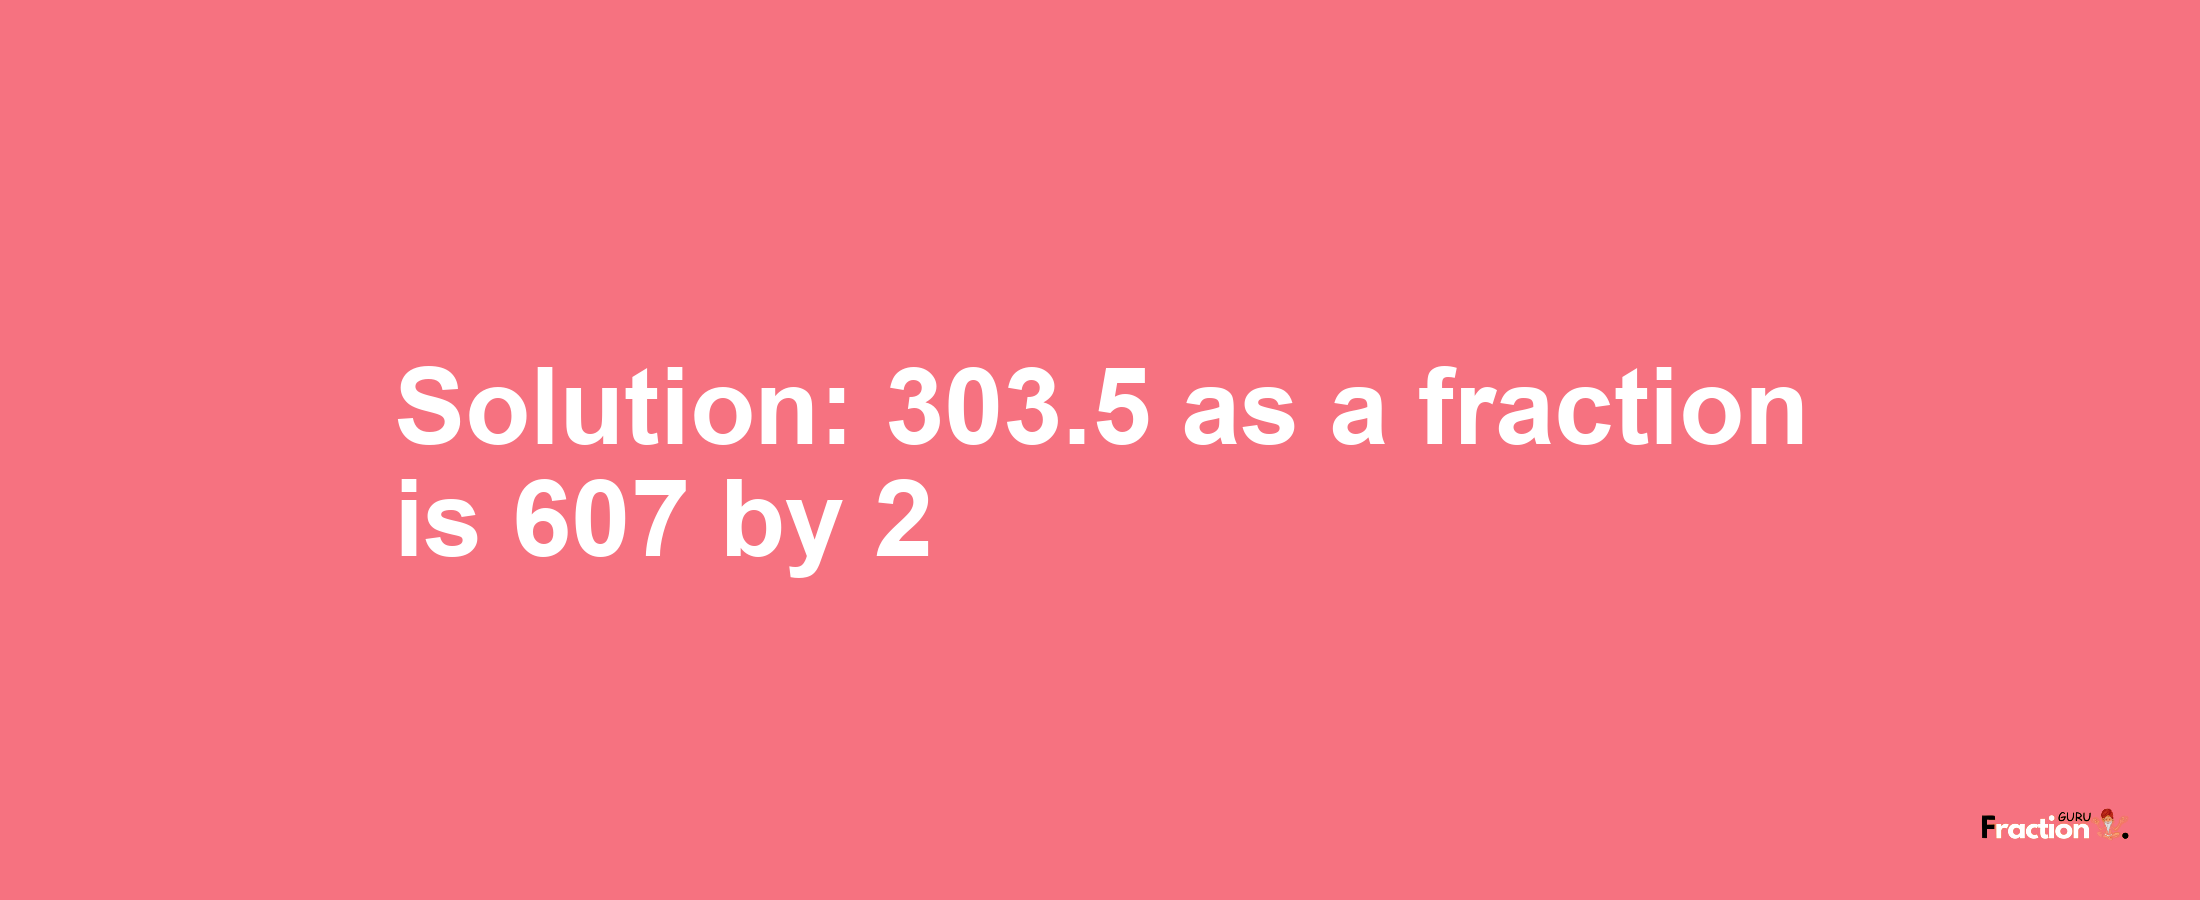 Solution:303.5 as a fraction is 607/2